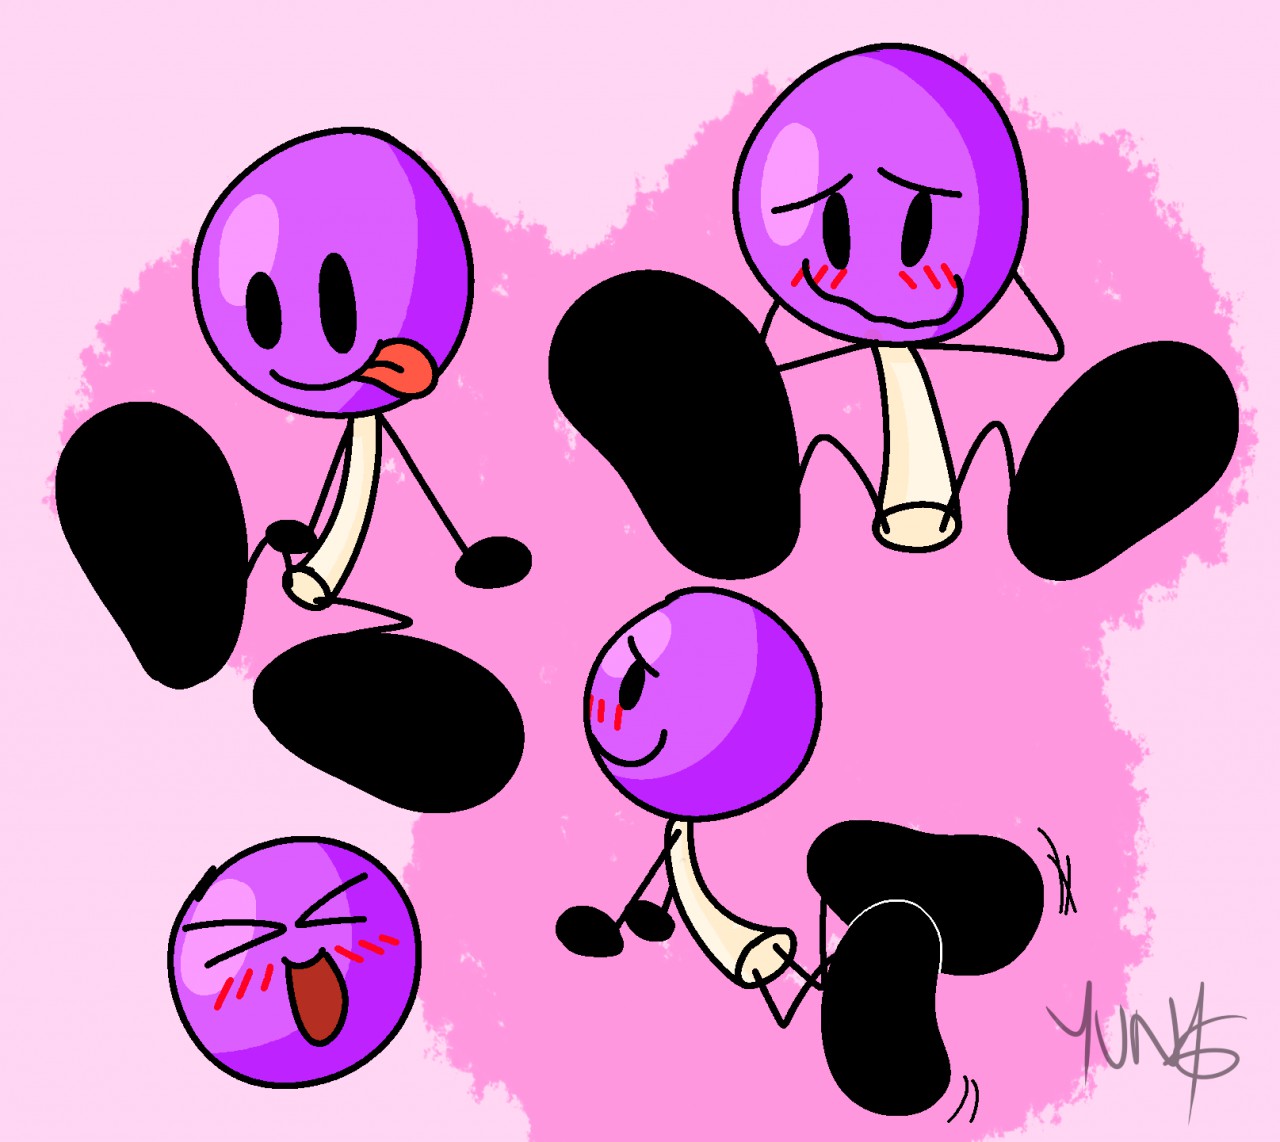 Lollipop Bfb Png - They must be uploaded as png files, isolated on a transp...